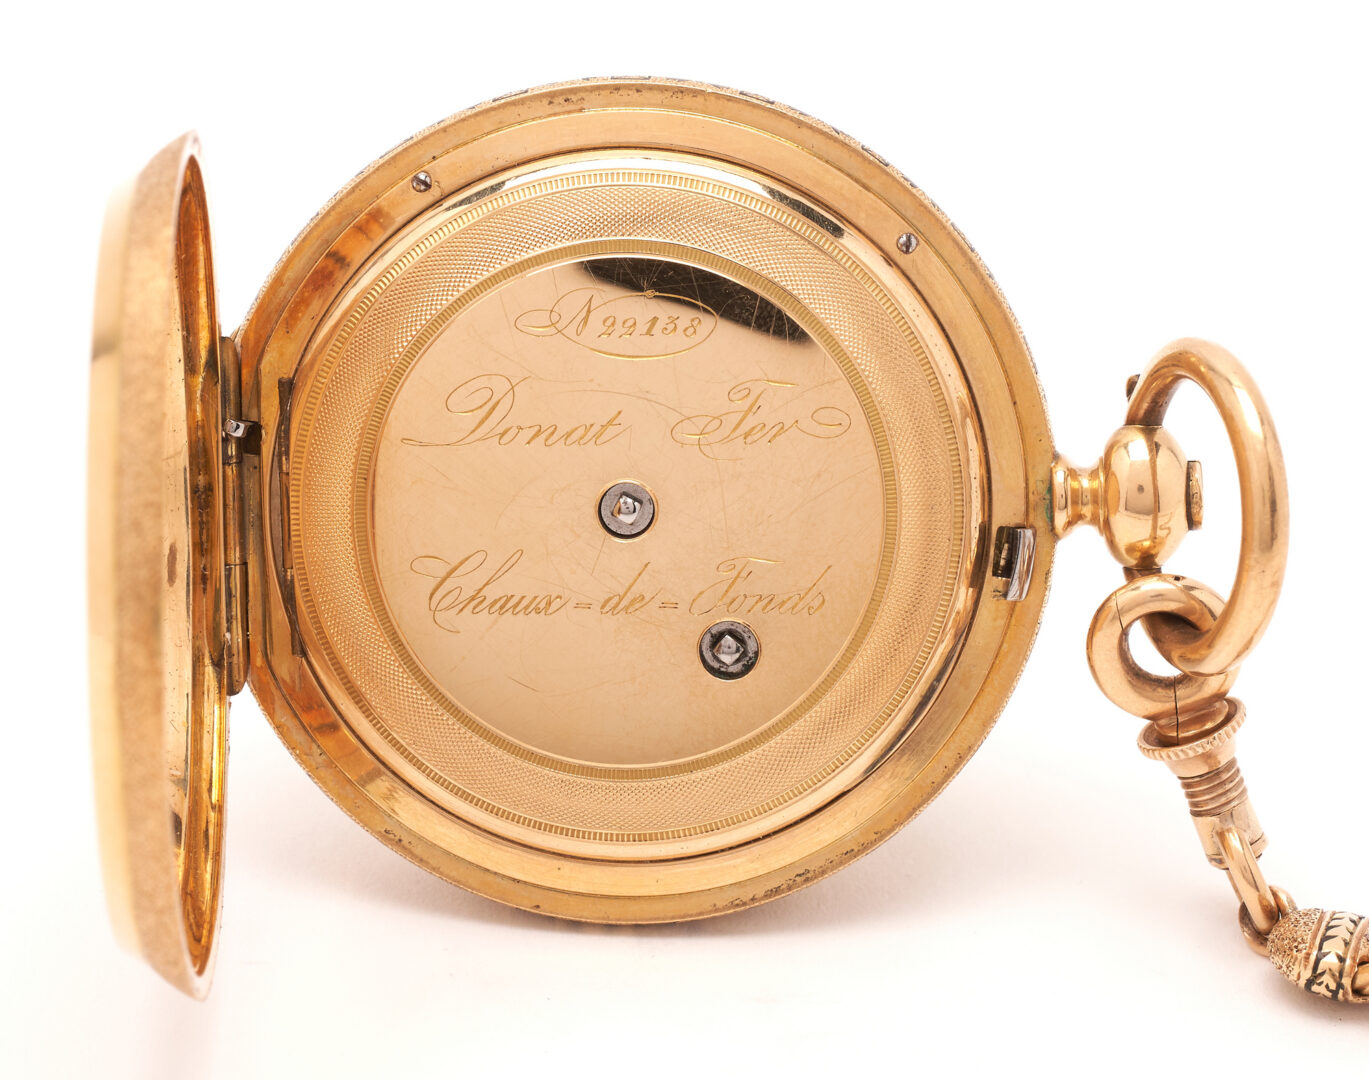 Lot 57: 18K Alfred Gerard by Charles Jacot Pocket Watch w/ 18K Chain